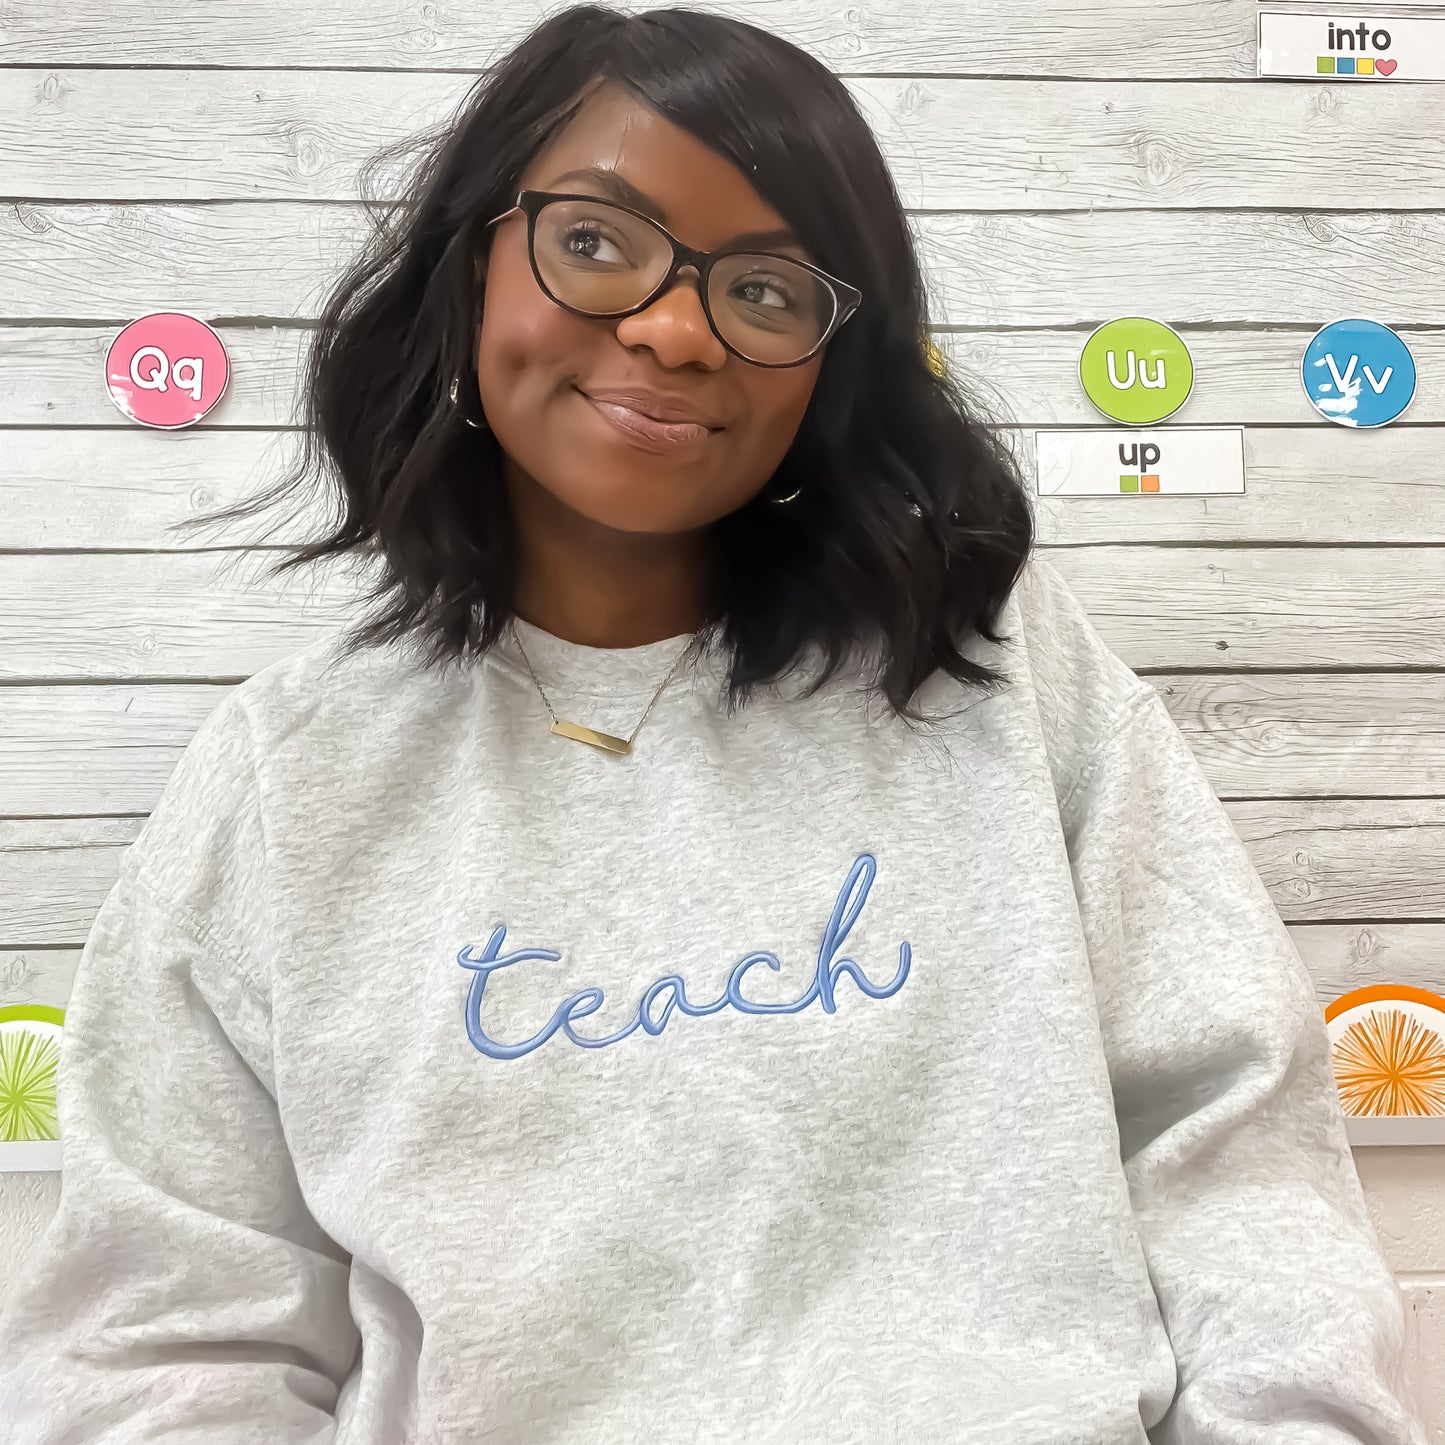 teacher wearing ash sweatshirt with embroidered teach design in periwinkle thread